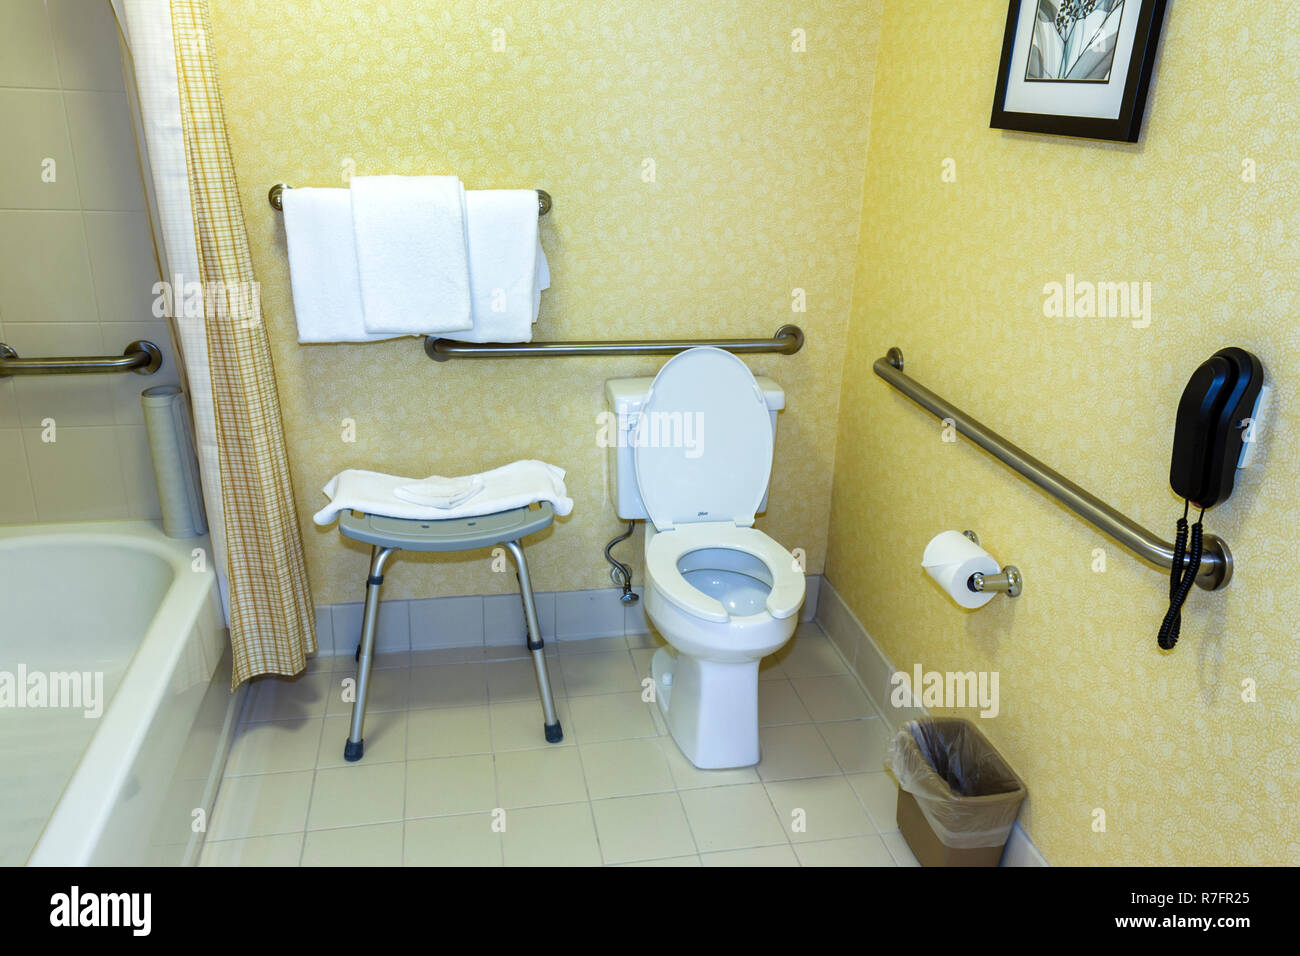 Florida Fort Ft. Lauderdale,Miramar,Residence Inn Marriott,chain,extended stay,motel,hotel,lodging,guest room,handicap,handicapped,wheelchair accessib Stock Photo